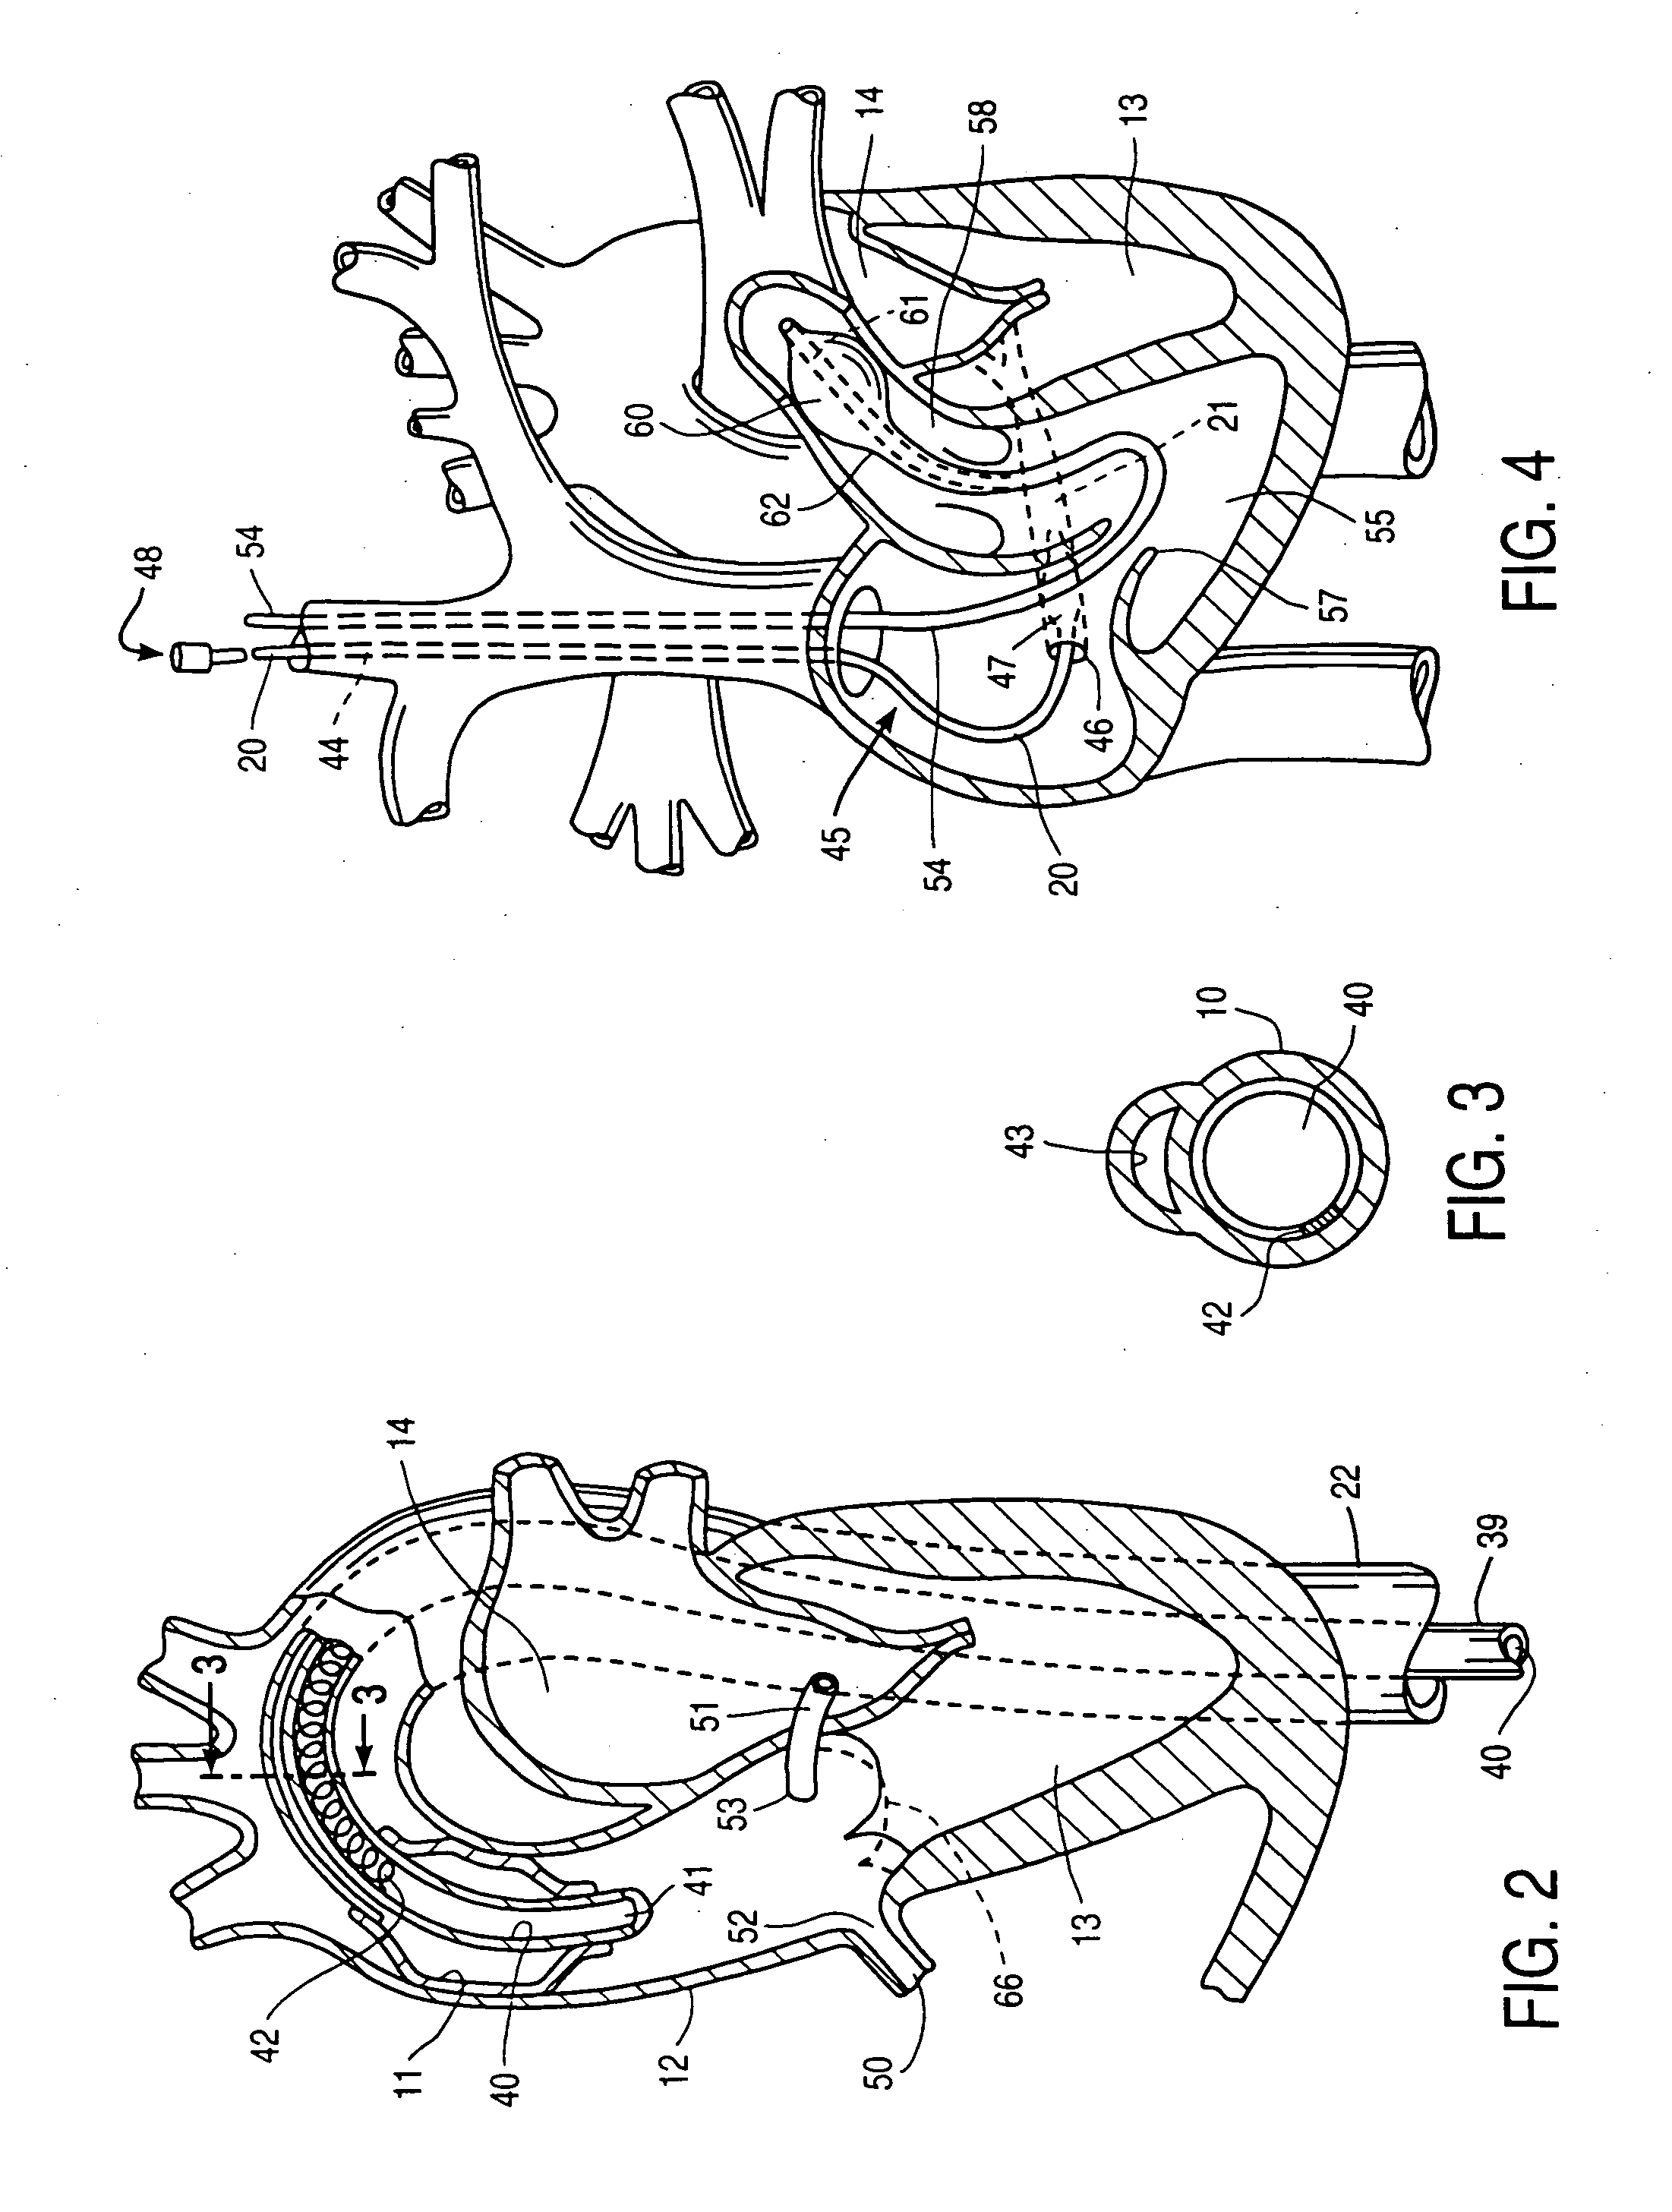 Methods and apparatus for anchoring an occluding member